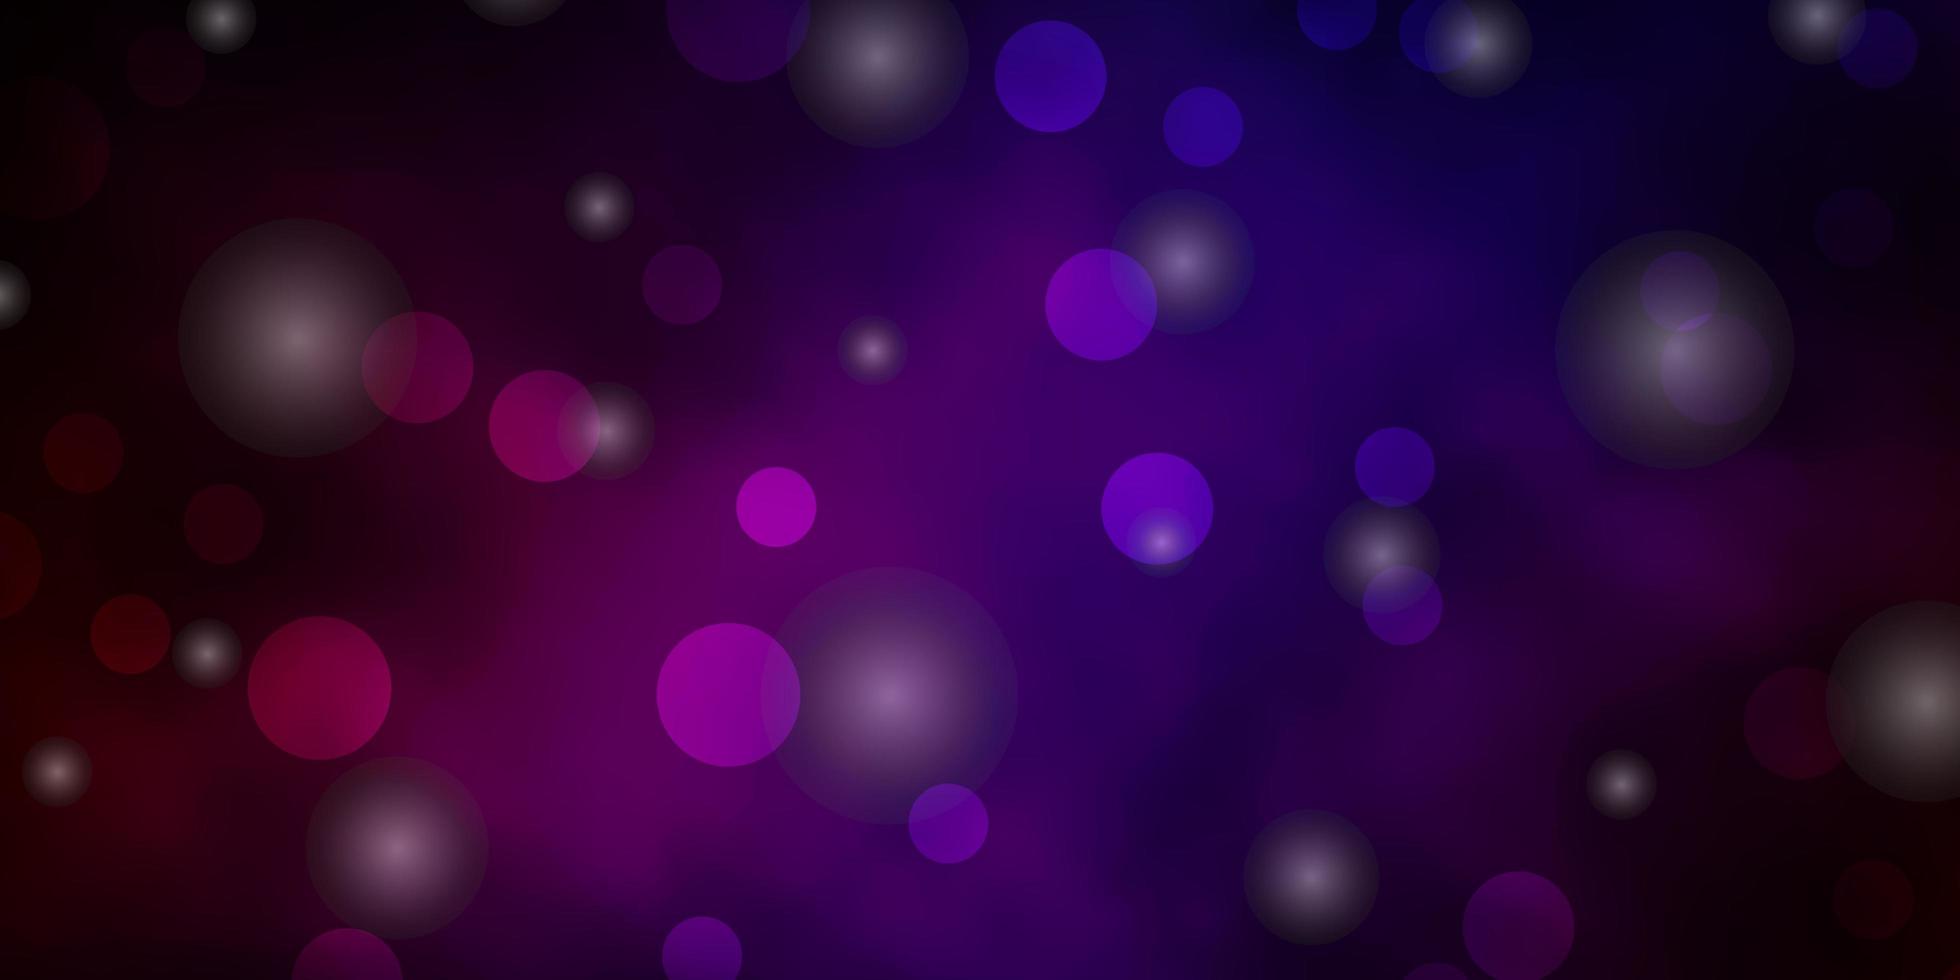 Dark Blue, Red vector background with circles, stars.